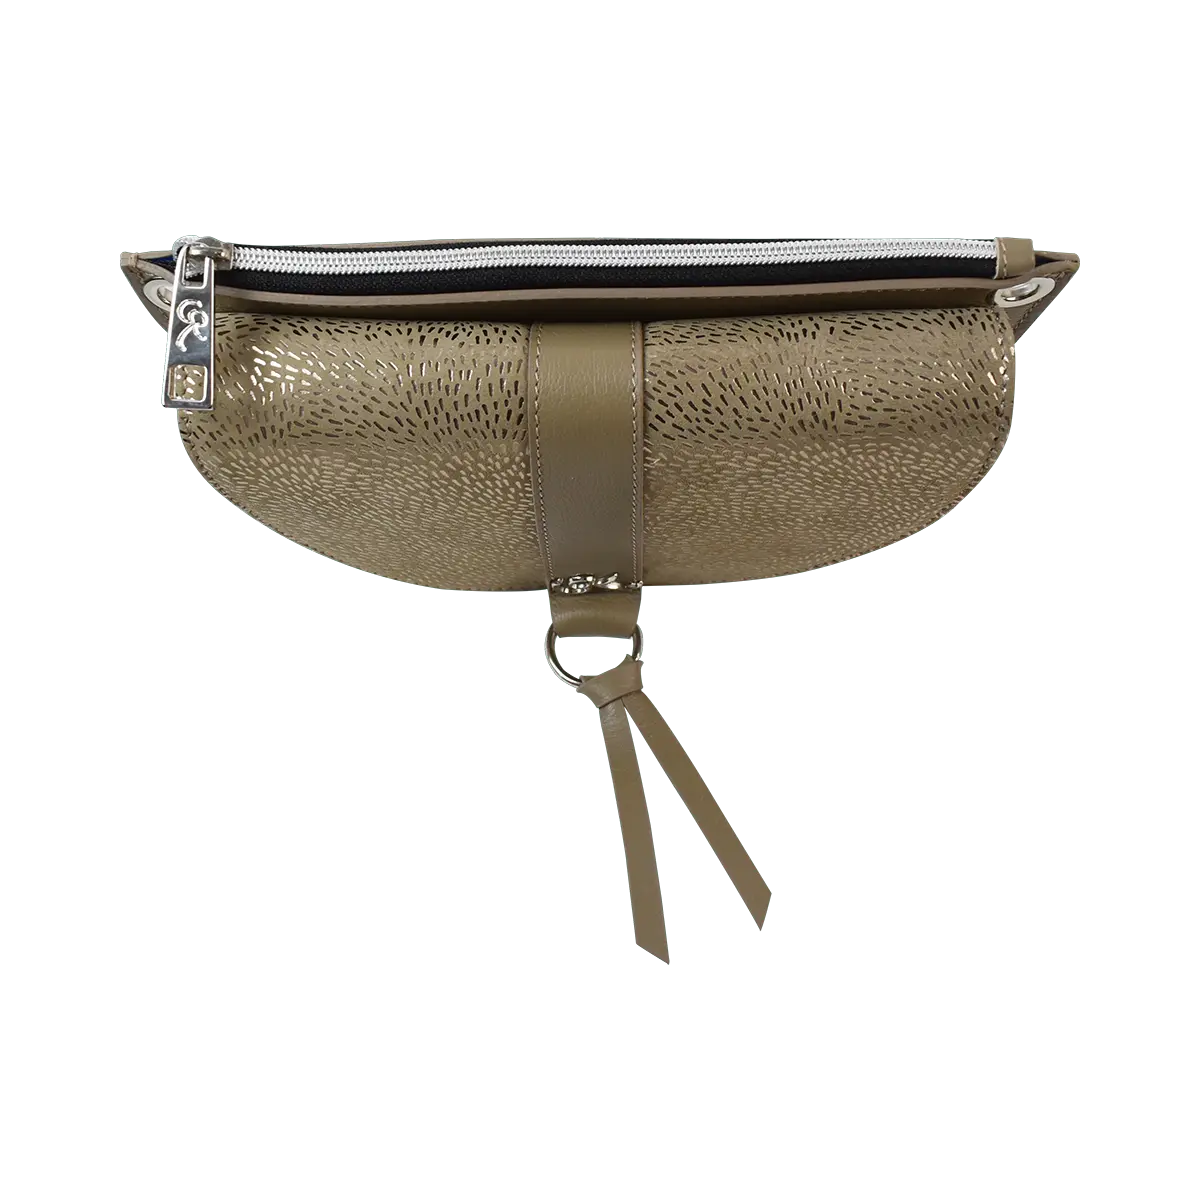 tan strip leather crossbody bag and fanny pack. Accessory for women in San Diego, CA.